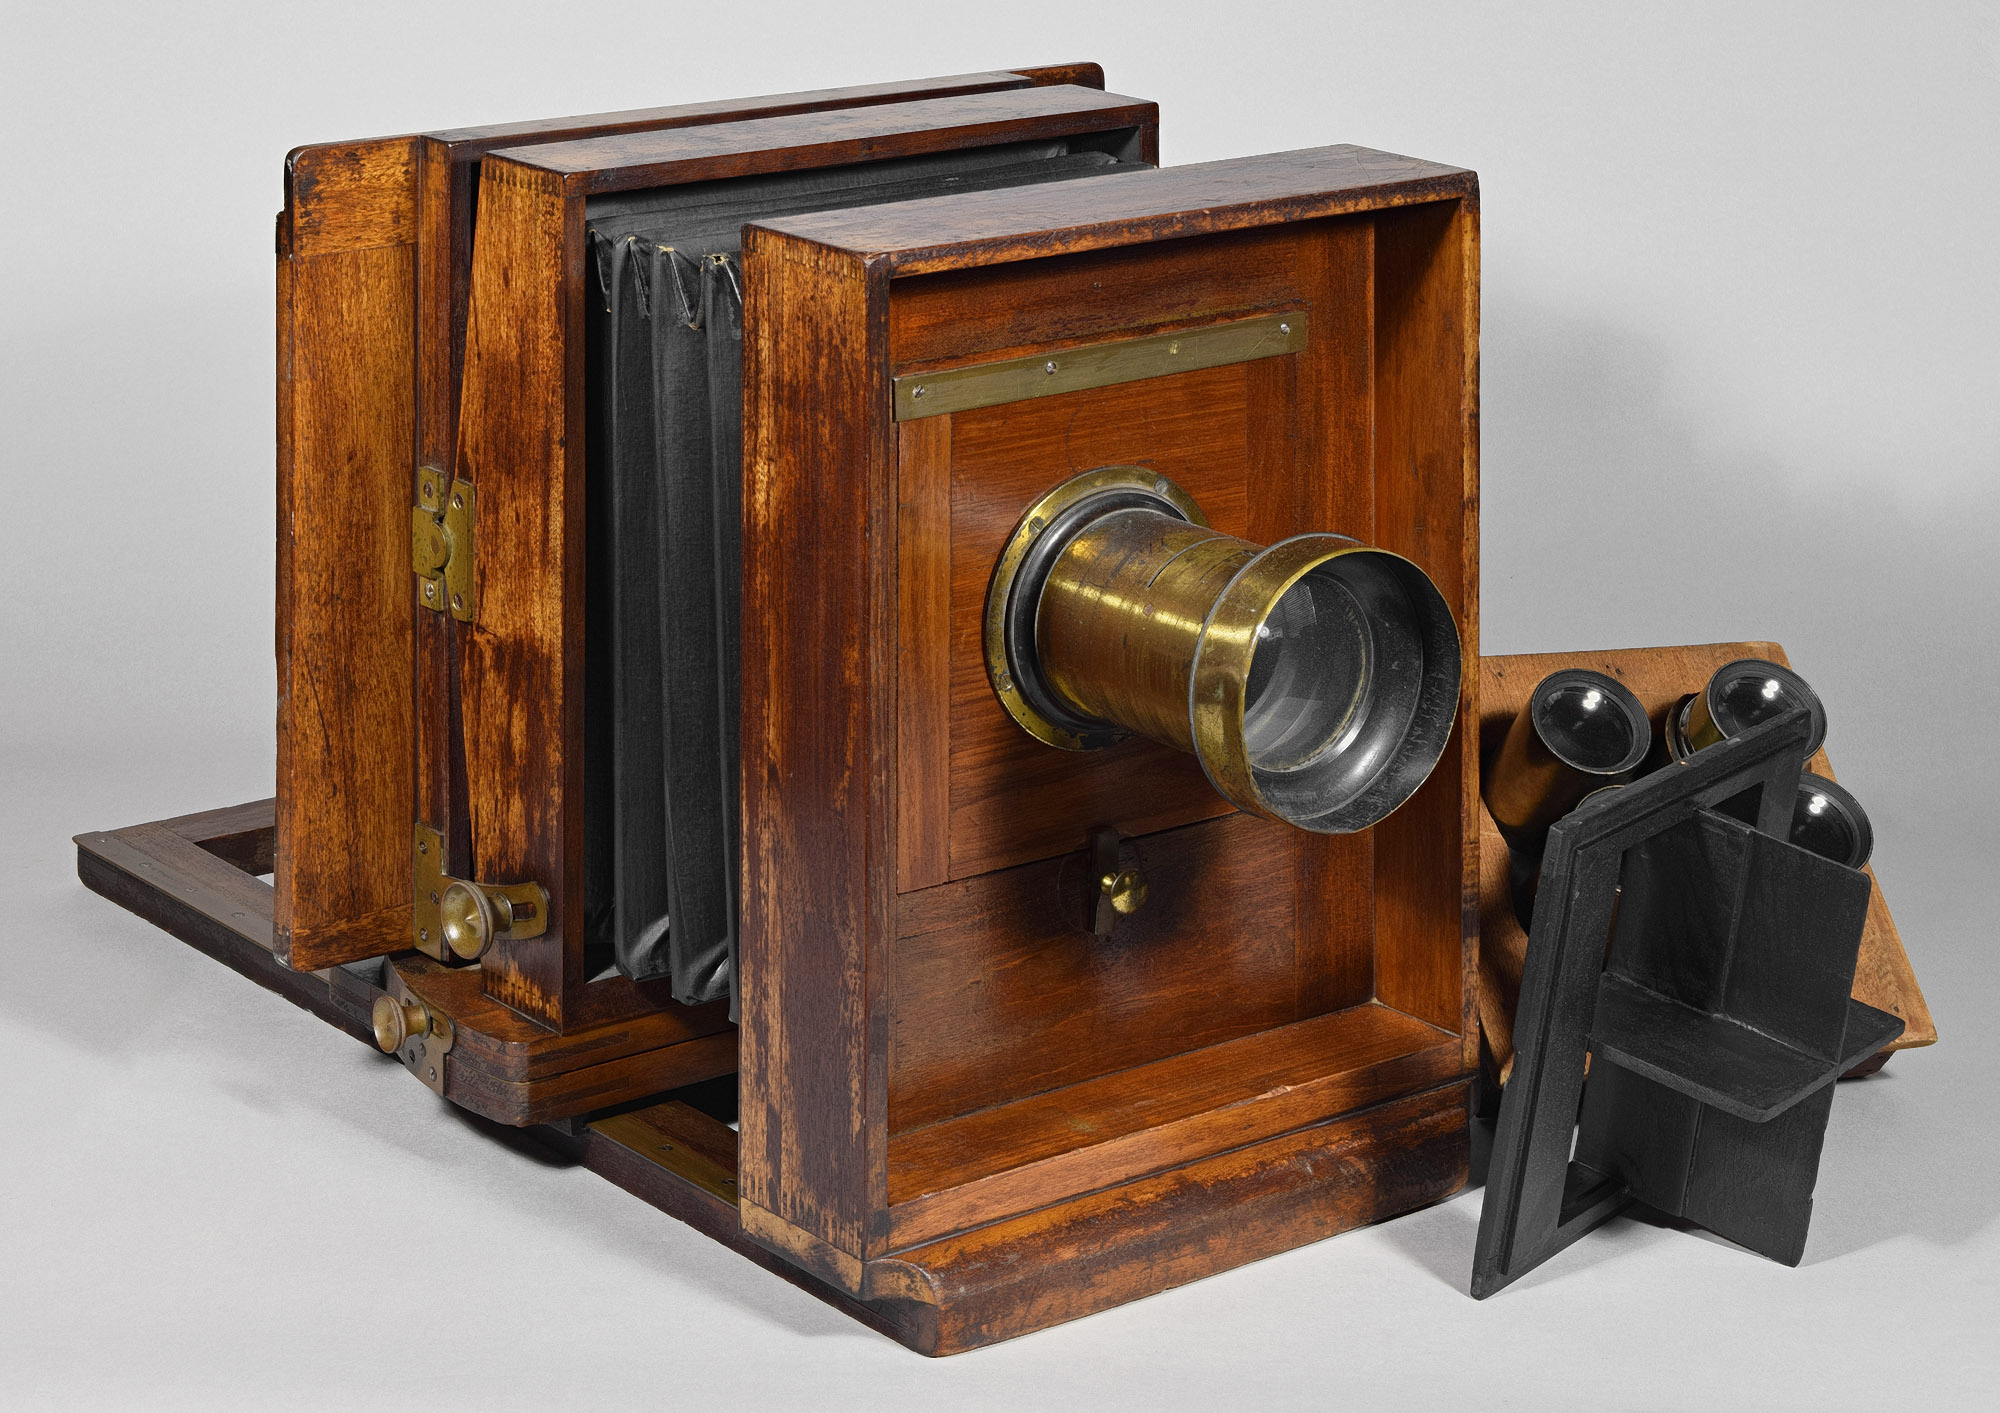 1240-American.Optical.Imperial.Cabinet.Camera-10x10-a2-with.cdv.lens.board&septum.inser-2000.jpg